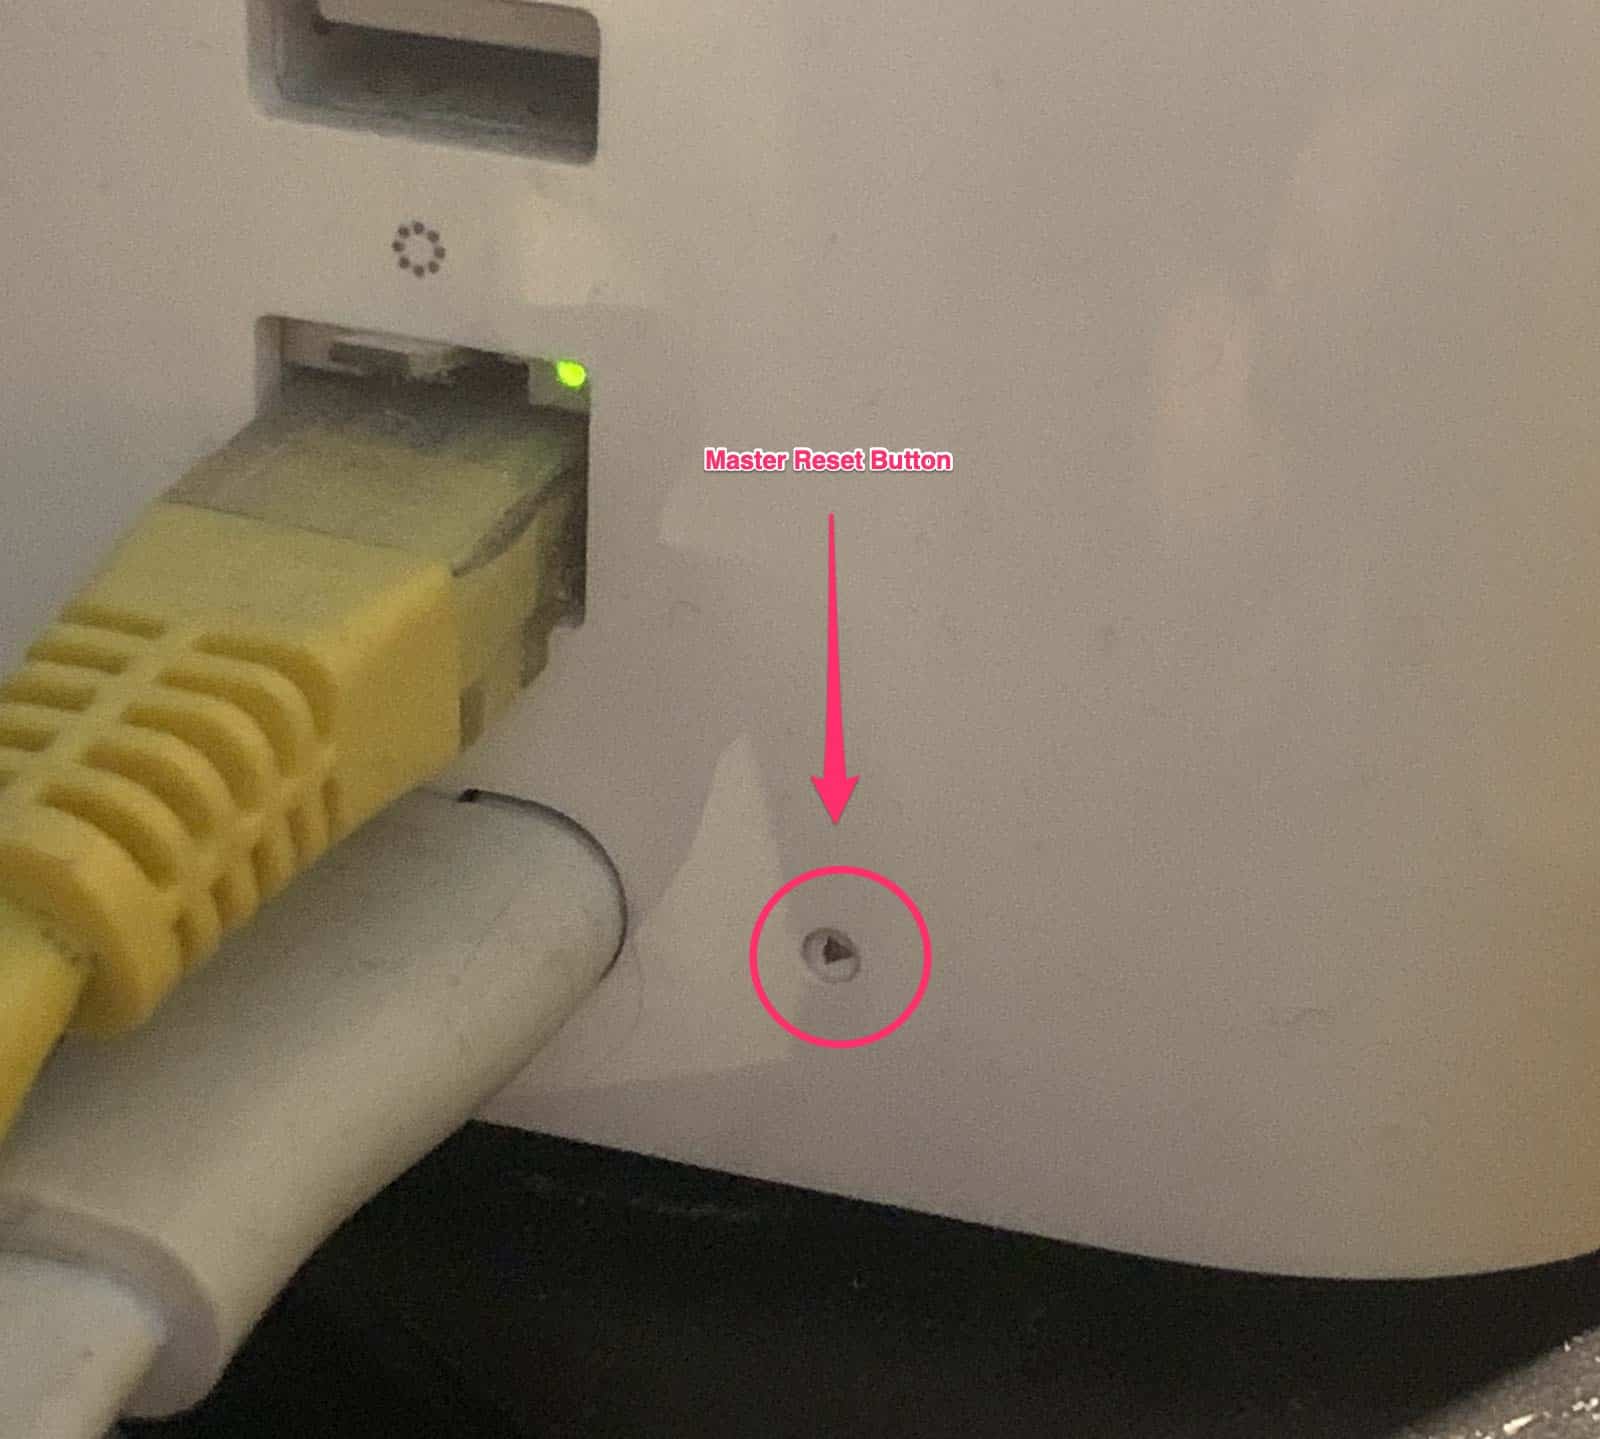 Can I Erase The Data Stored In A Router?